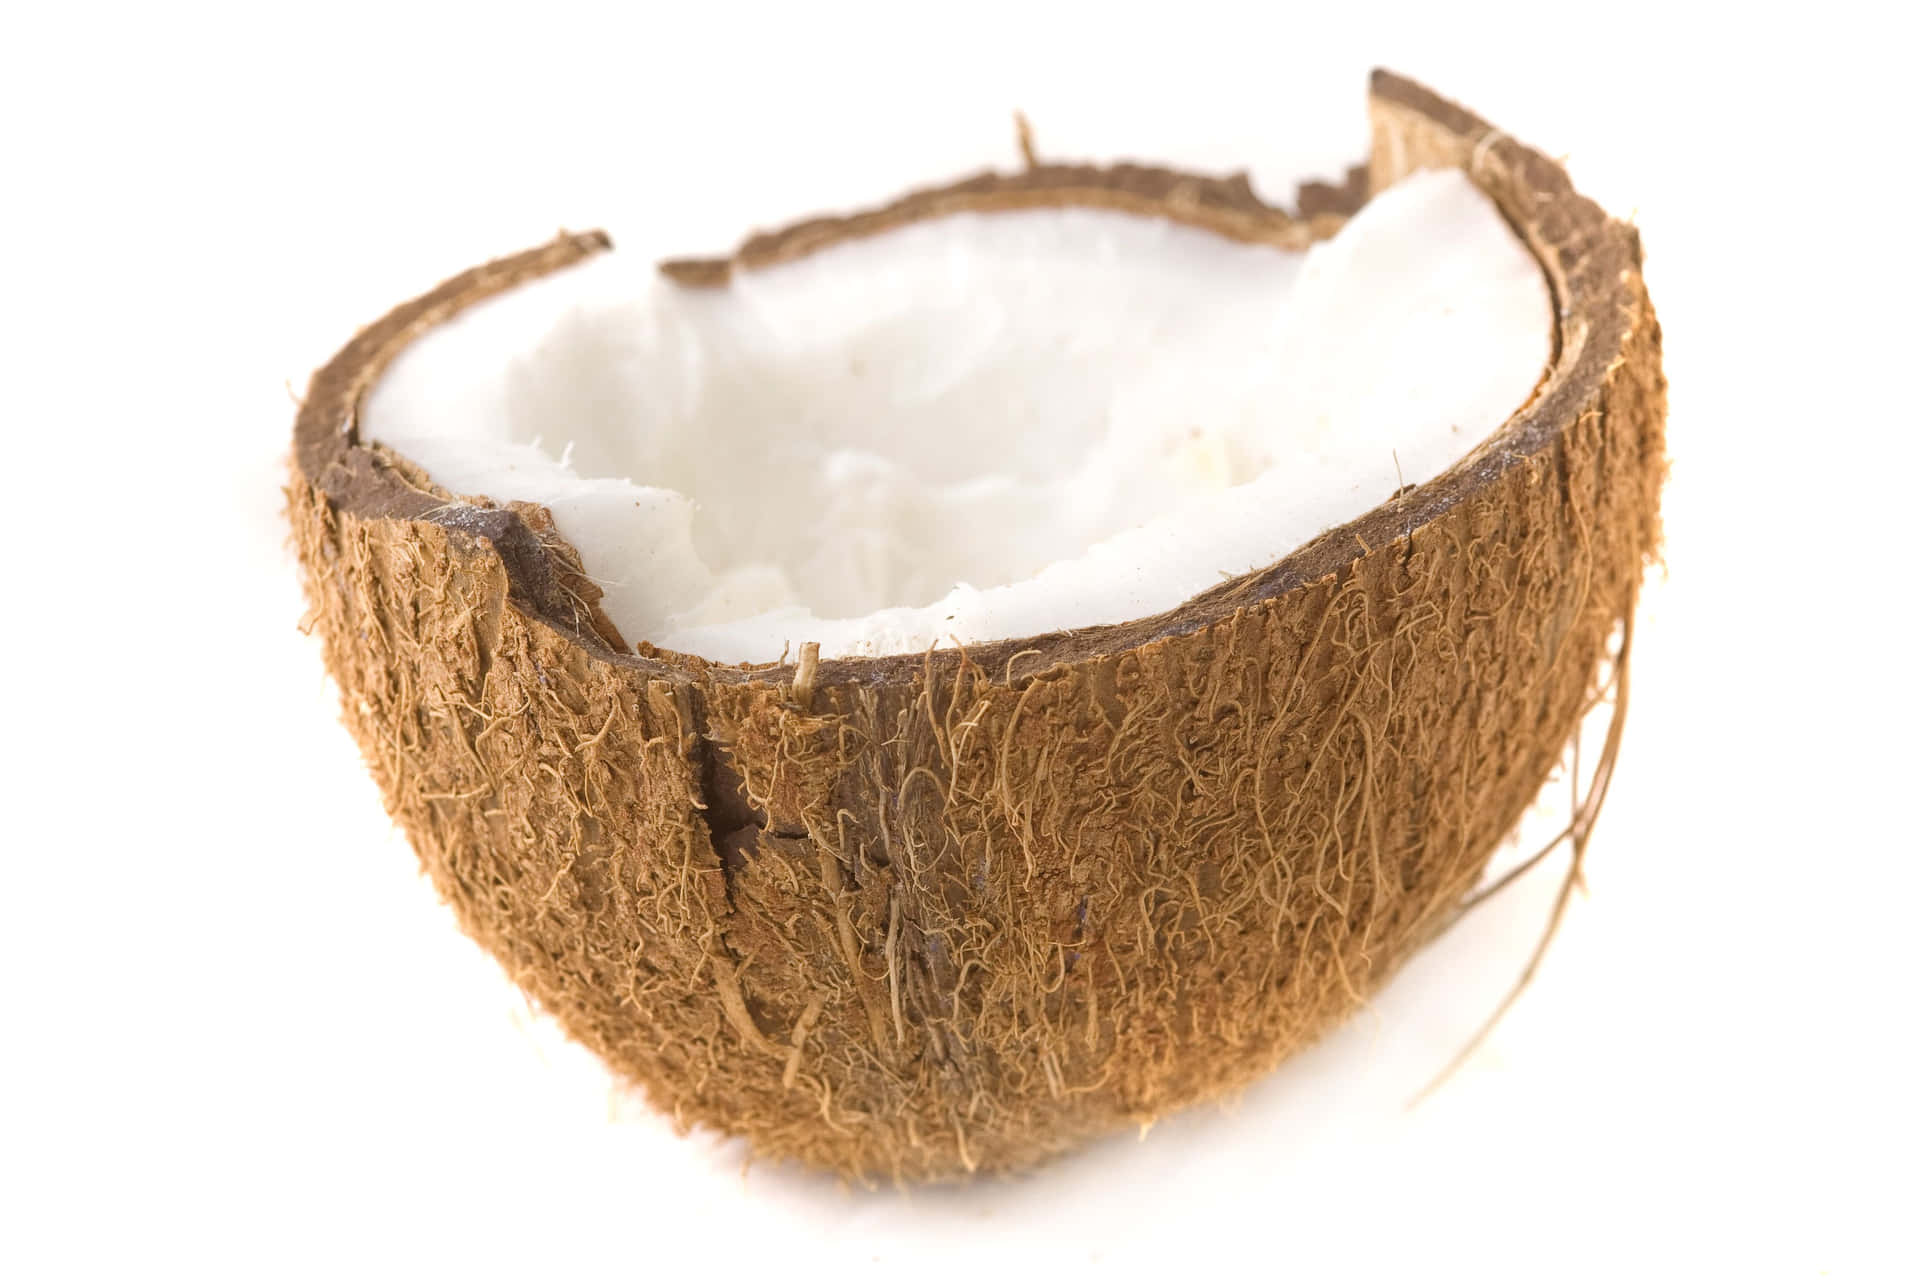 Discover and Enjoy the Natural Refreshment of a Coconut